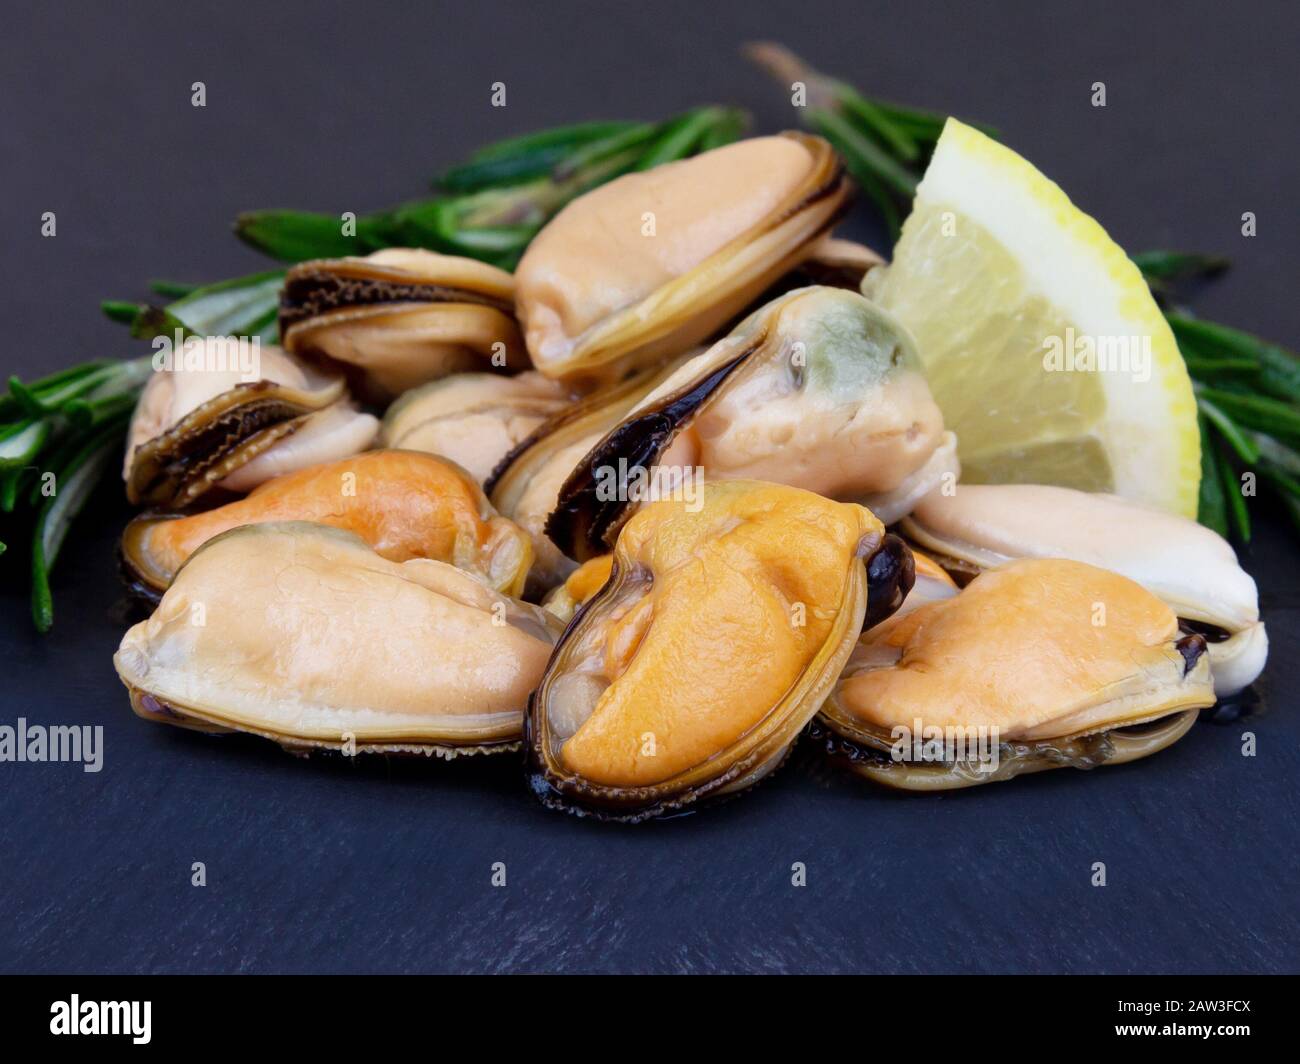 Mussels in oil and spices food background copy space. Stock Photo